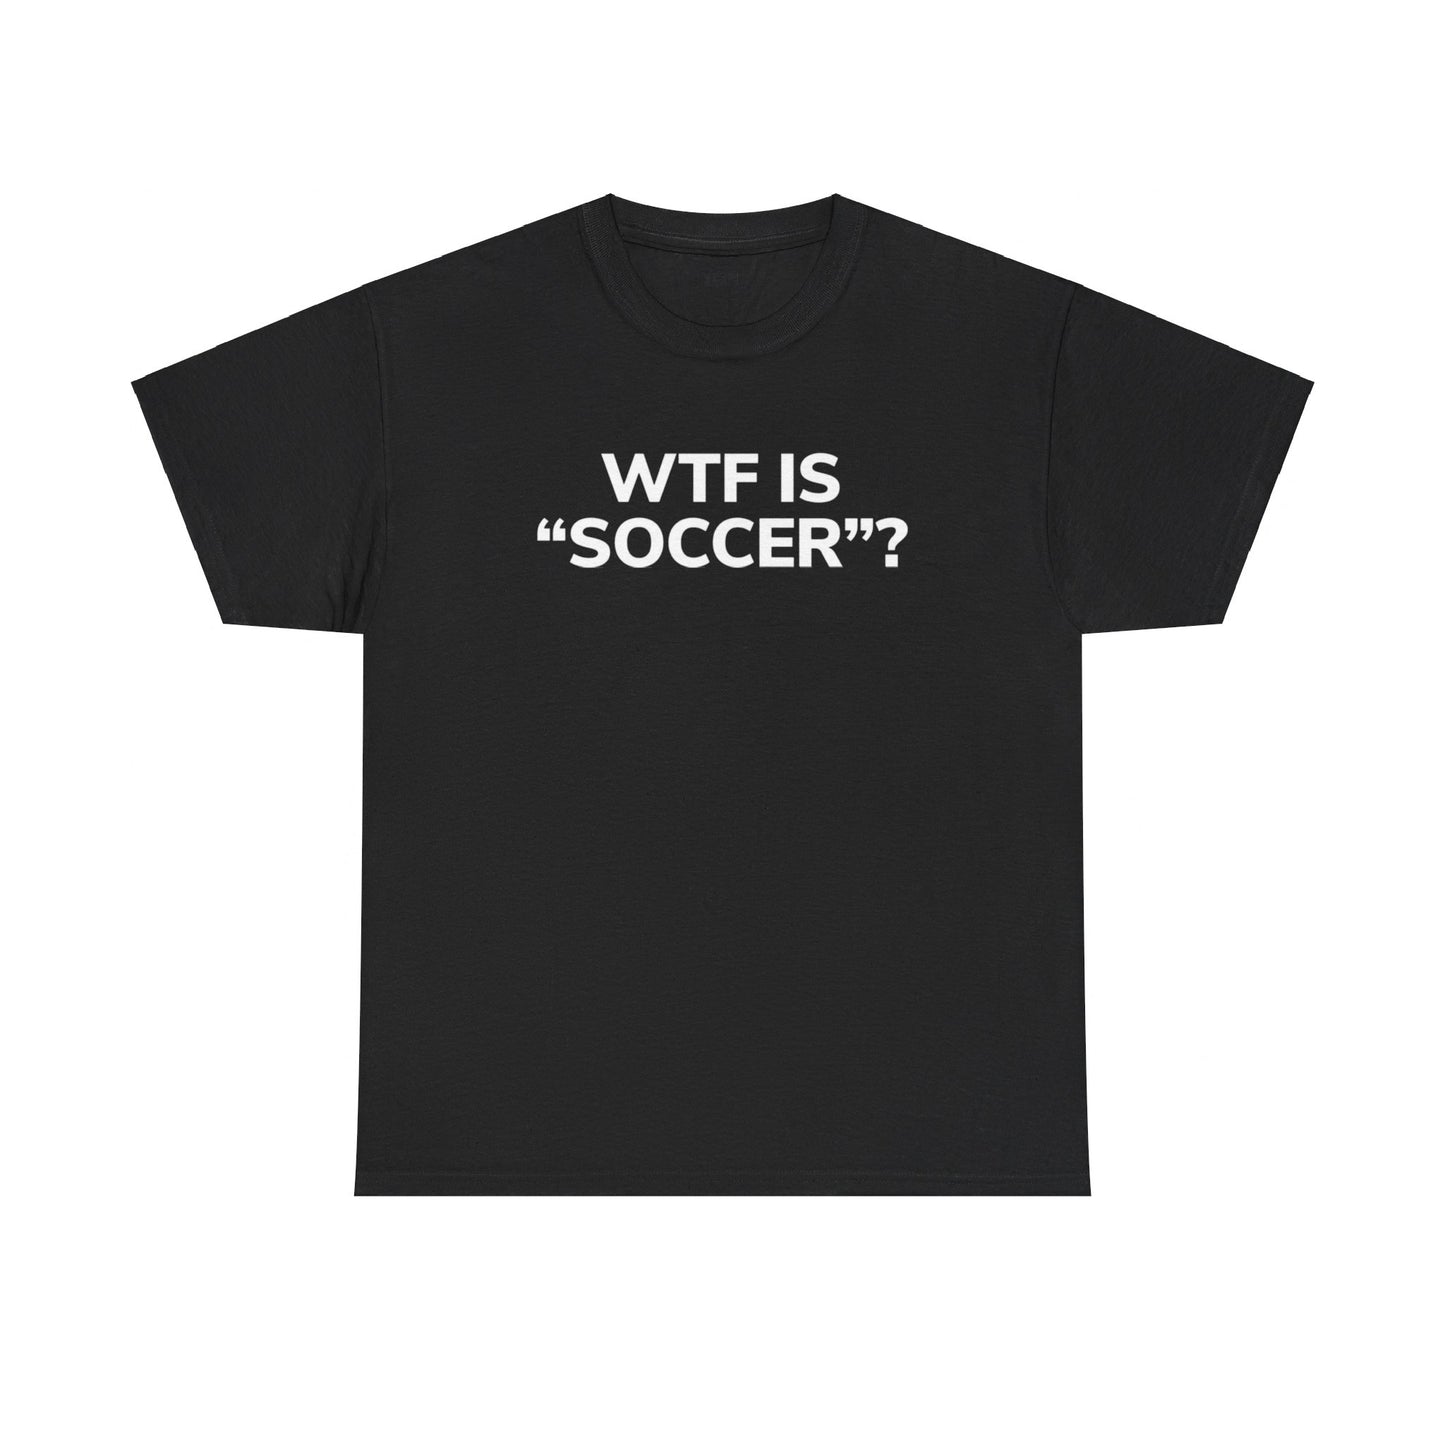 WTF IS "SOCCER"? (T - SHIRT)